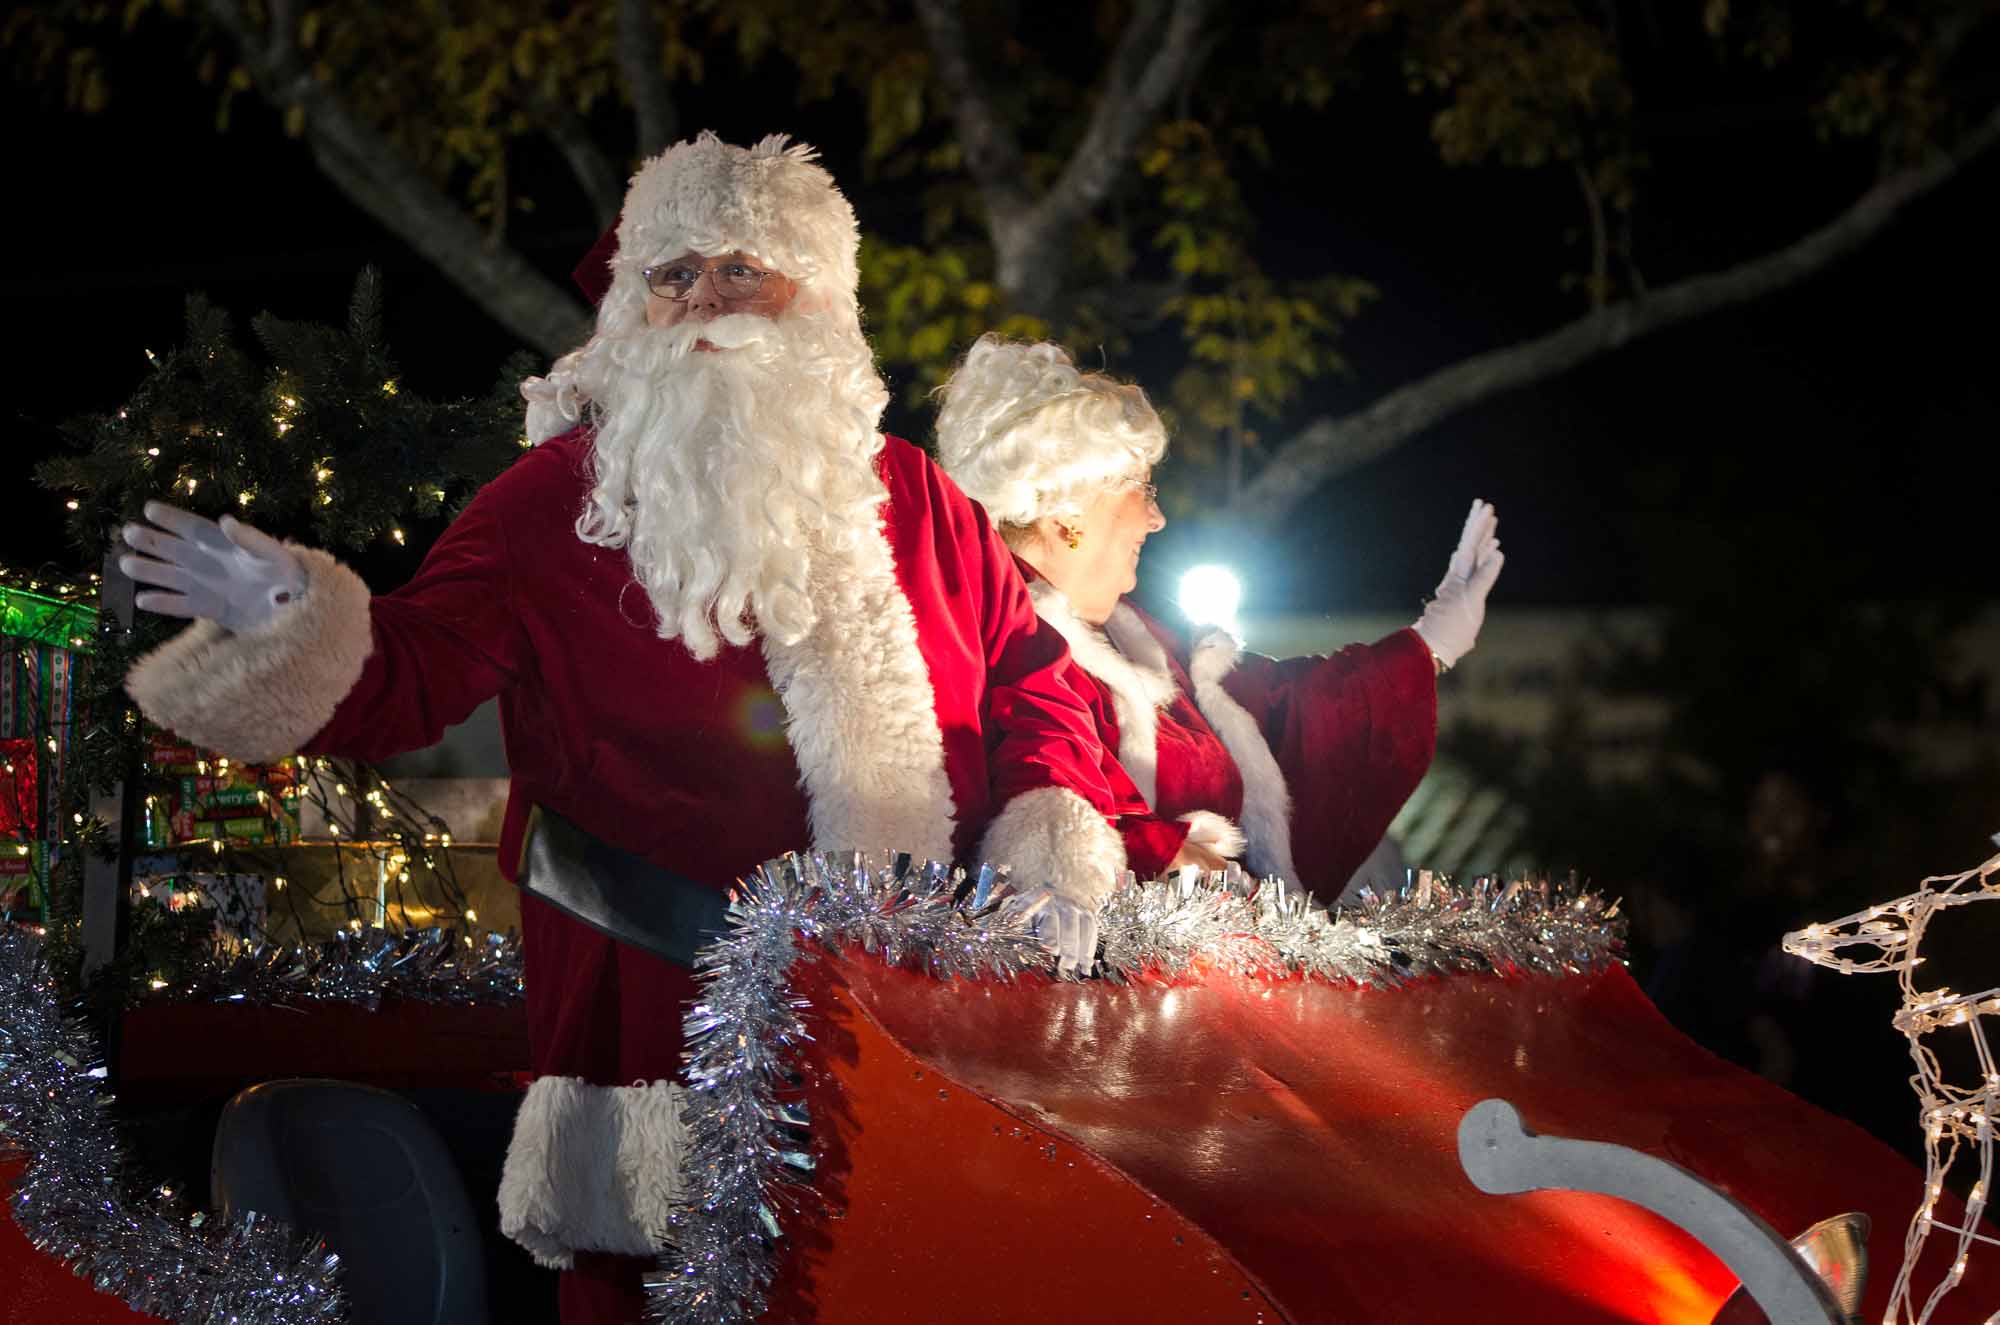 Coral Springs 'Santa's Express' Coming to a Neighborhood Near You